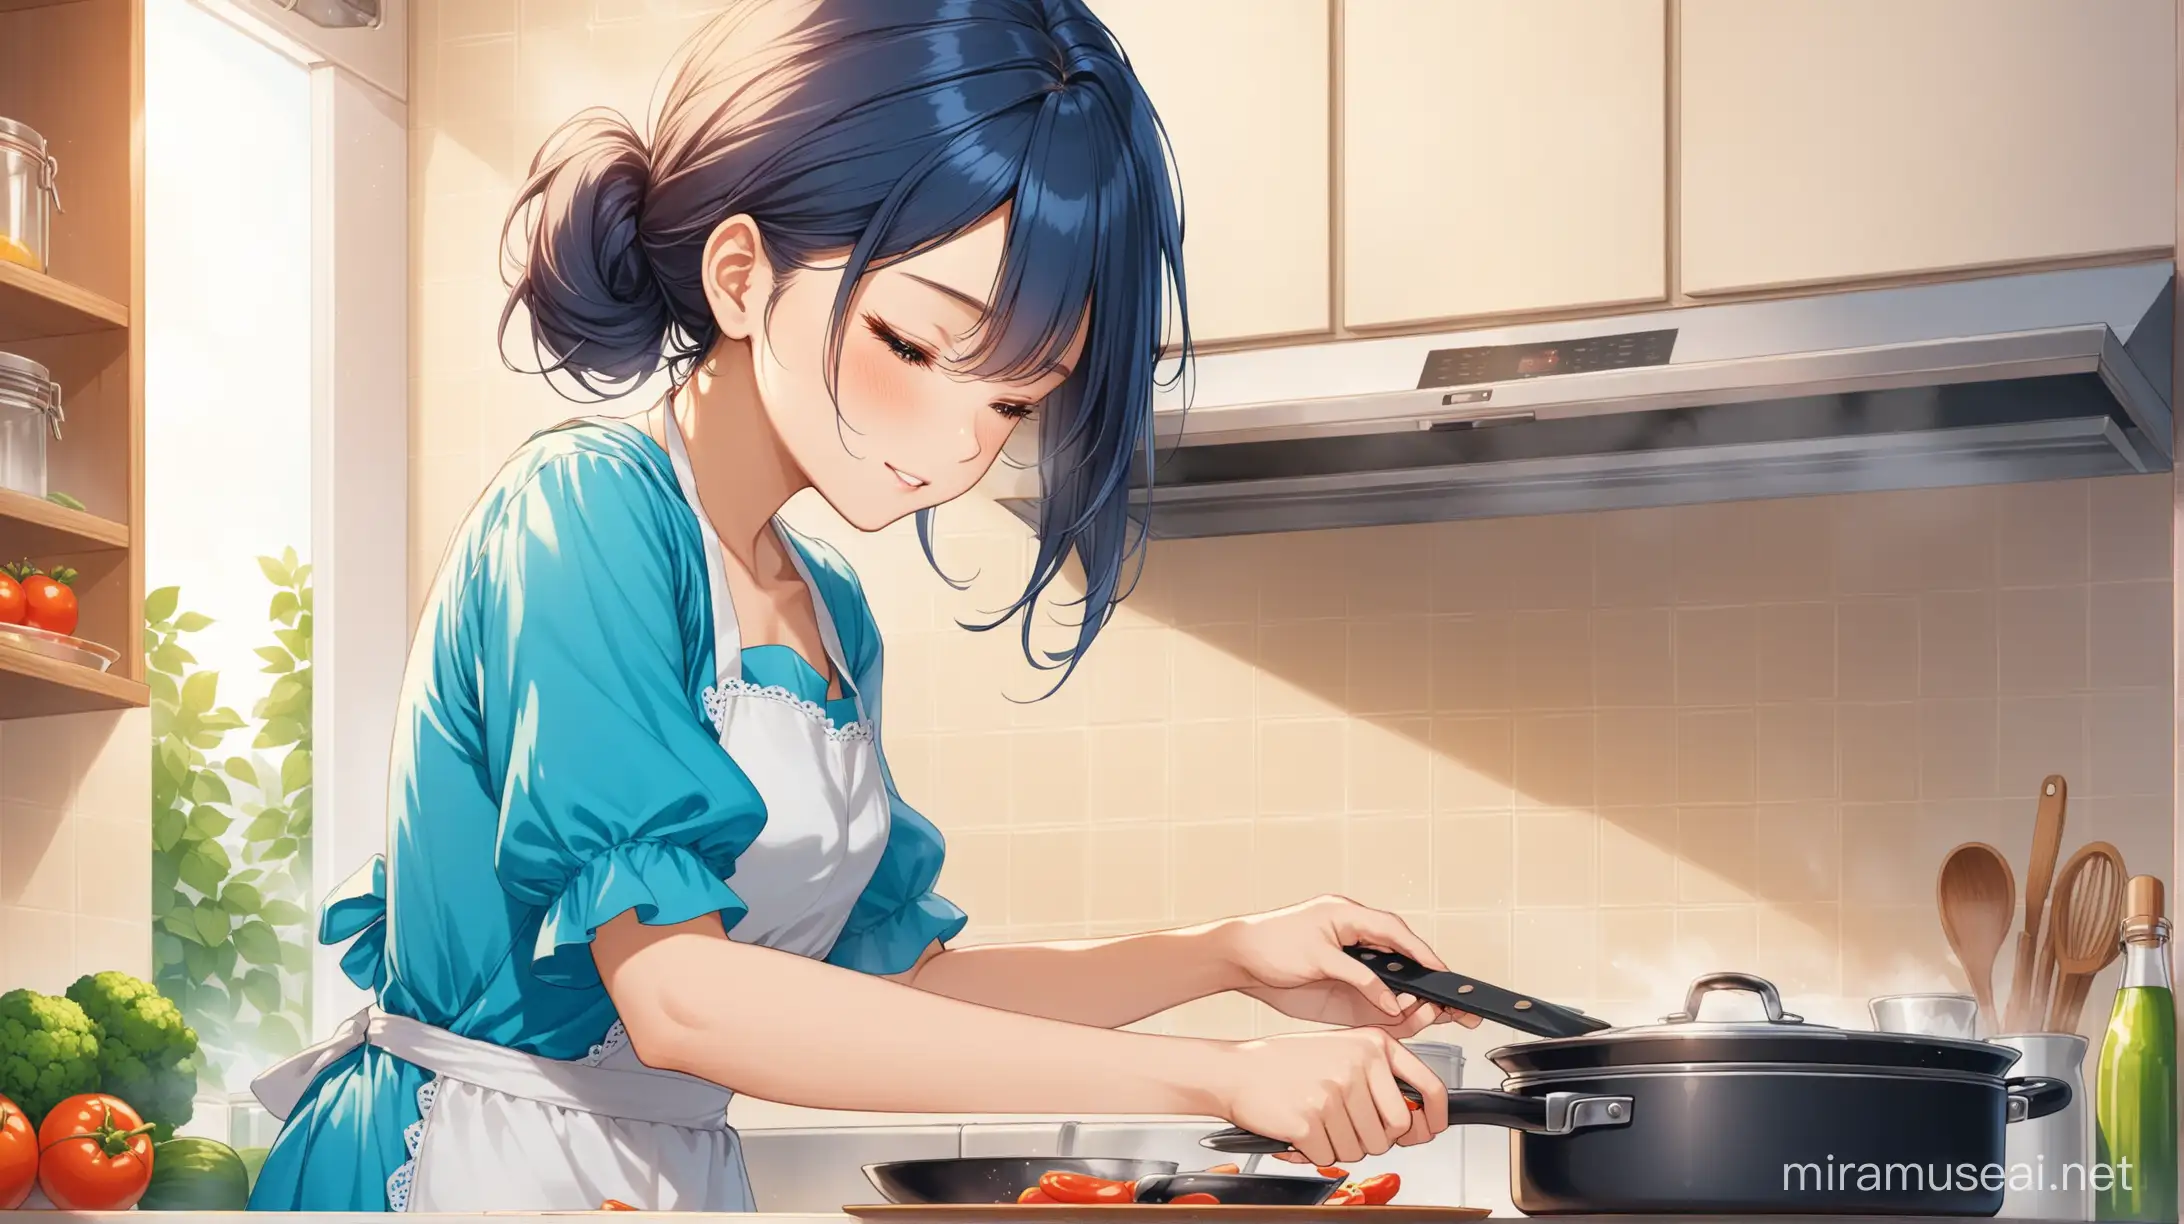 A girl is cooking in the kitchen, wearing a blue dress and an apron.